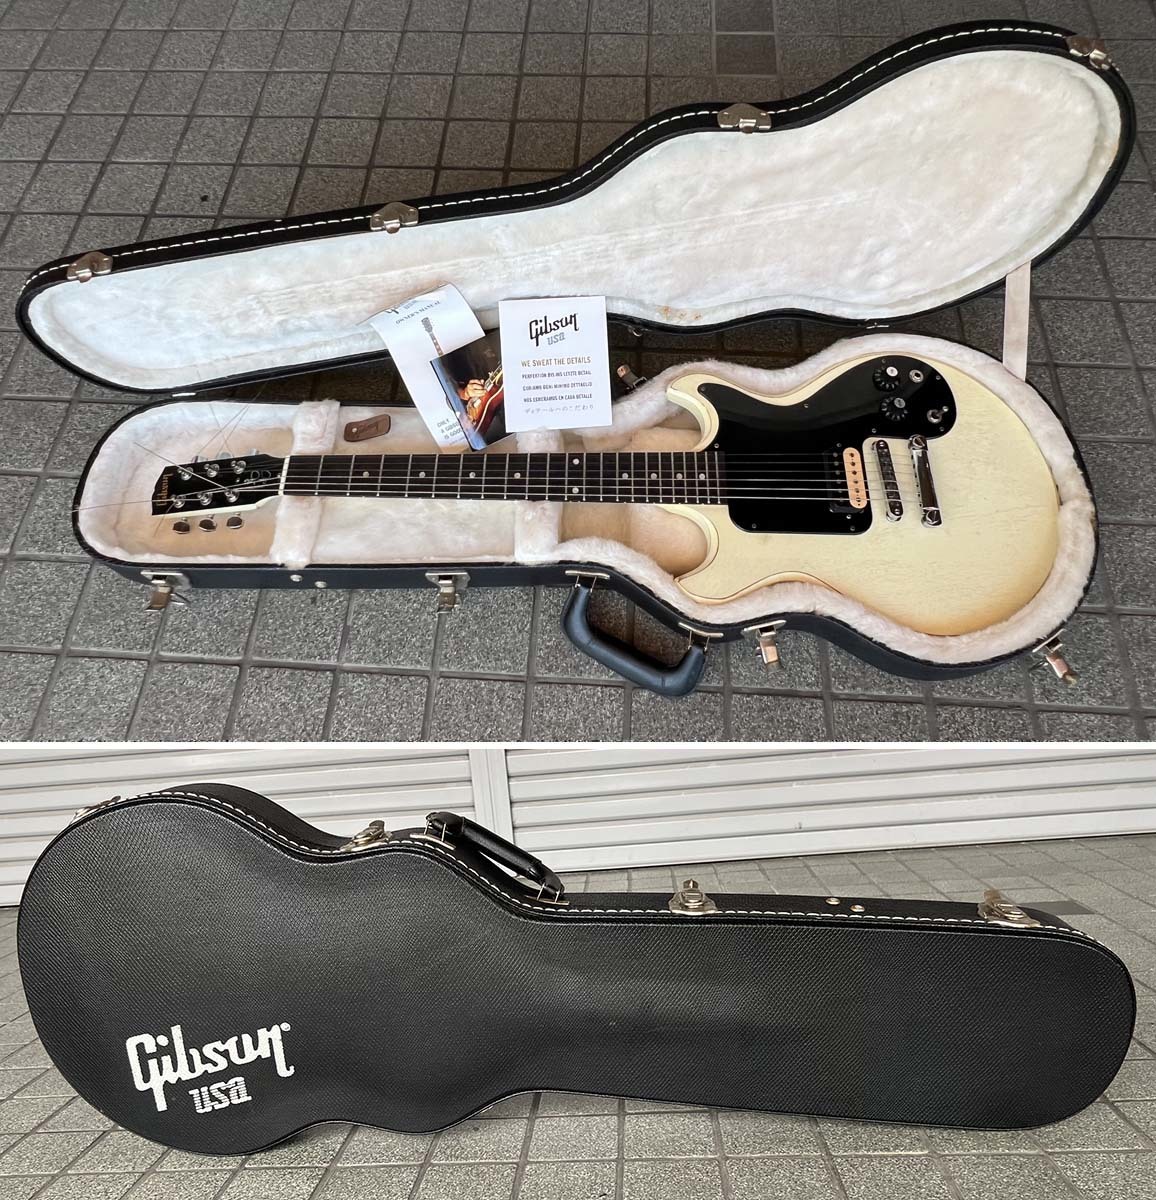 ● Gibson Joan Jett Melody Maker Worn White 2010年製 ギブソン ジョーン・ジェット メロディ メーカー ハードケース付 Made in USA _画像10